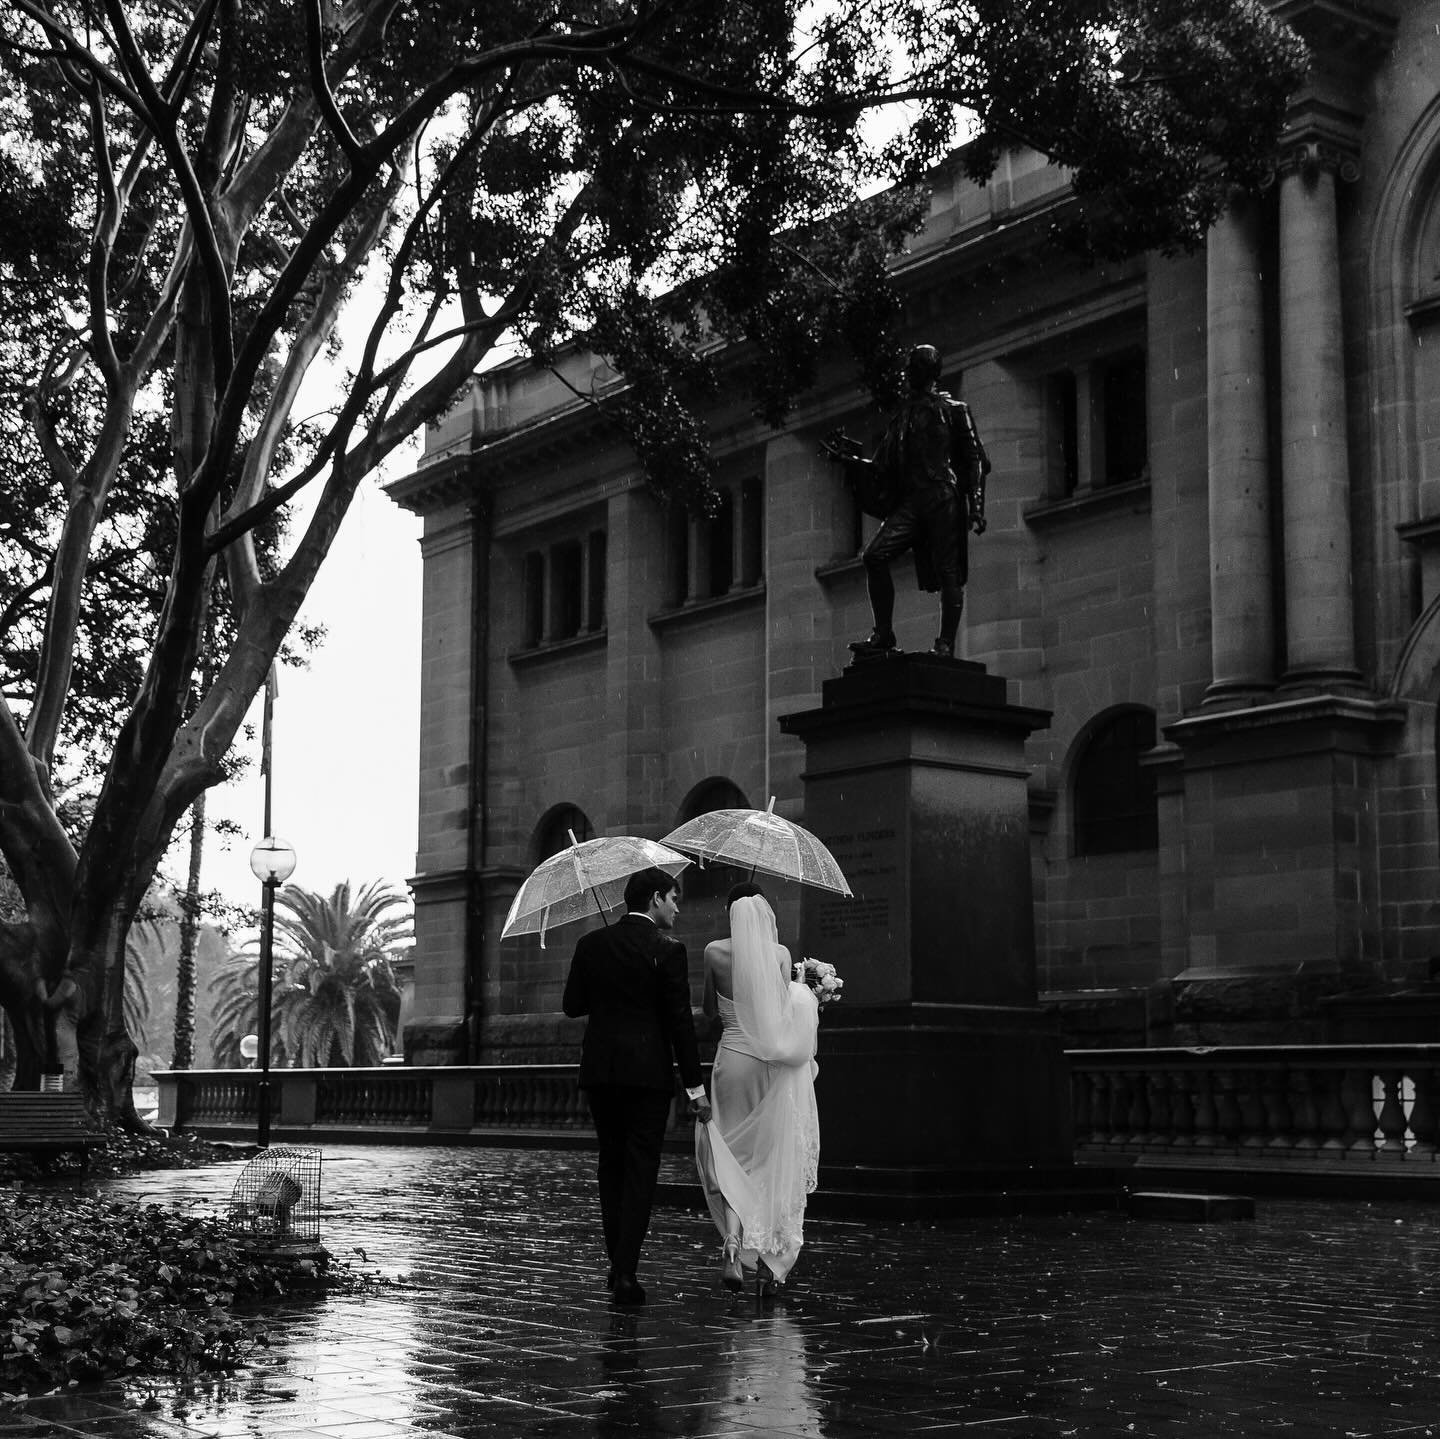 Kerrie &amp; Justin 🤍
A few weeks ago I watched Kerrie and Justin exchange vows on one of the rainiest days I can remember. The beautiful buildings of The Mint were the perfect place to say I Do on a rainy day with its old world feel and stunning ar